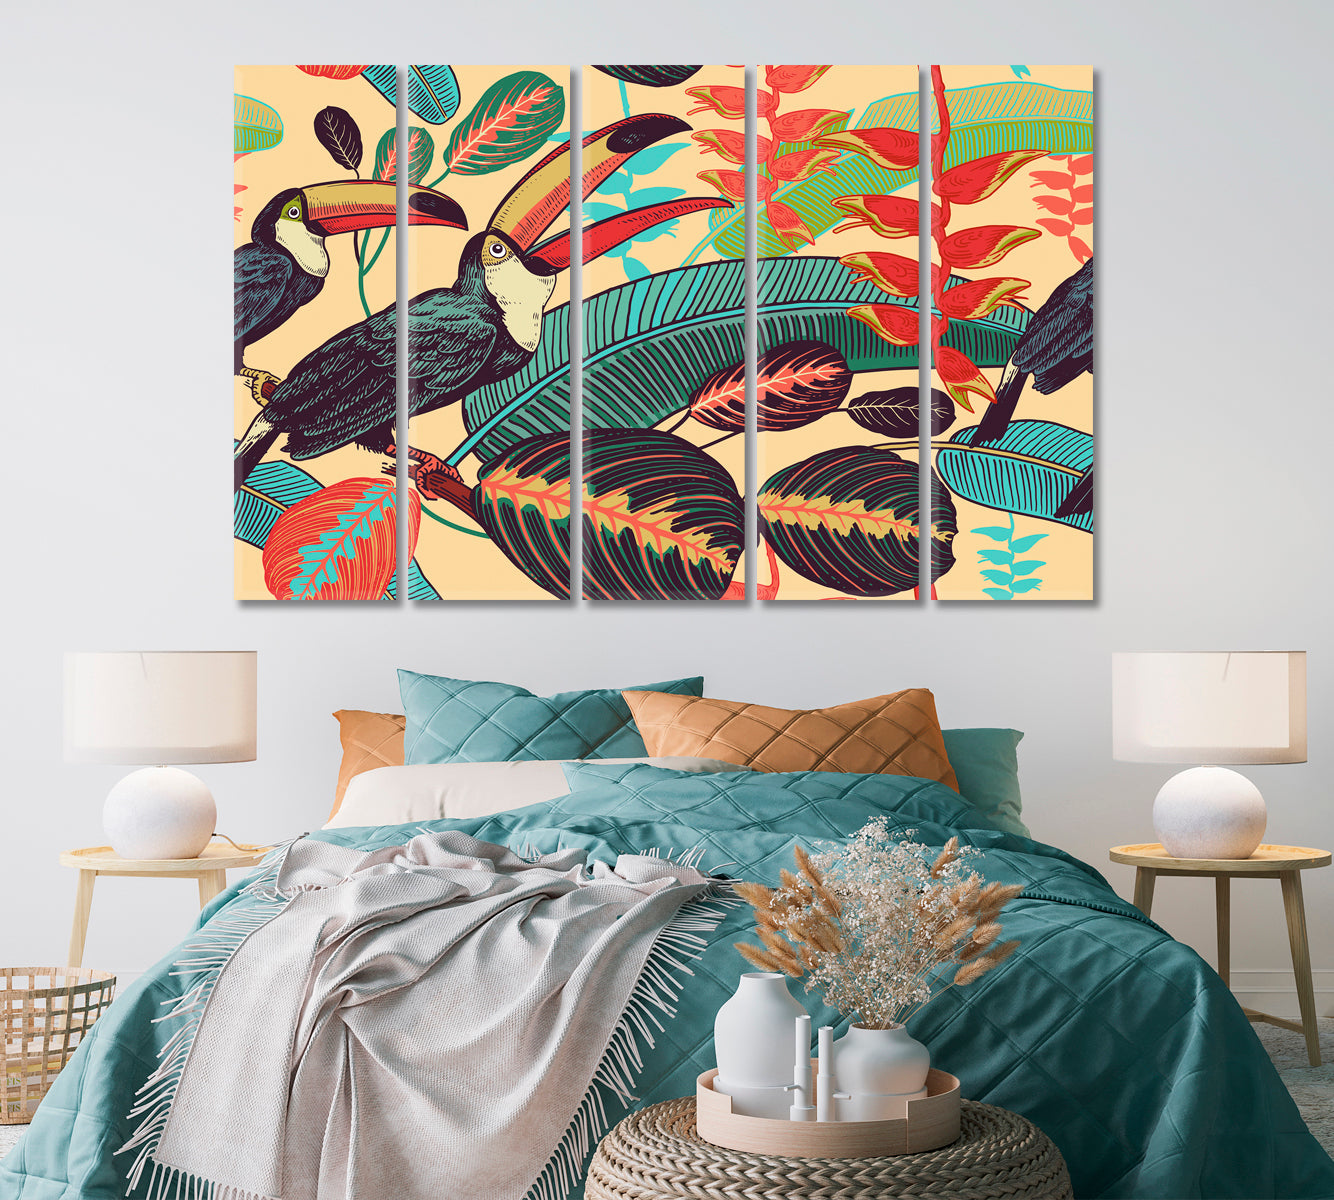 Toucans with Tropical Leaves and Flowers Canvas Print ArtLexy   